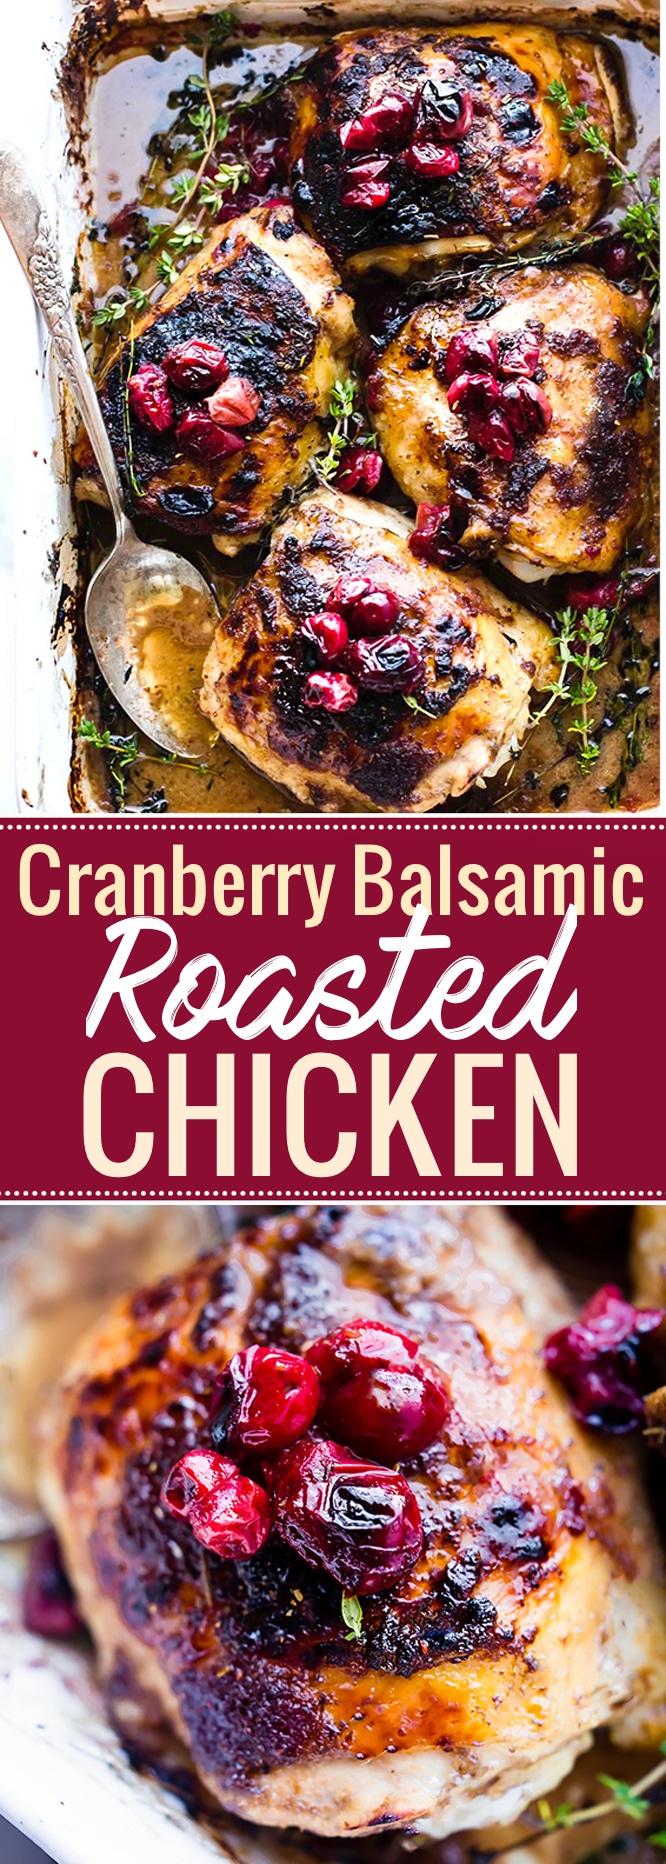 Balsamic Roasted Chicken with Cranberries prepped and cooked in ONE PAN! Yes, your holiday table is complete. This Paleo Cranberry Balsamic Roasted Chicken is a simple yet healthy dinner. A sweet tangy marinade makes this roasted chicken extra juicy and extra crispy. One of our go to meals for meal prep too! www.cottercrunch.com @cottercrunch.com